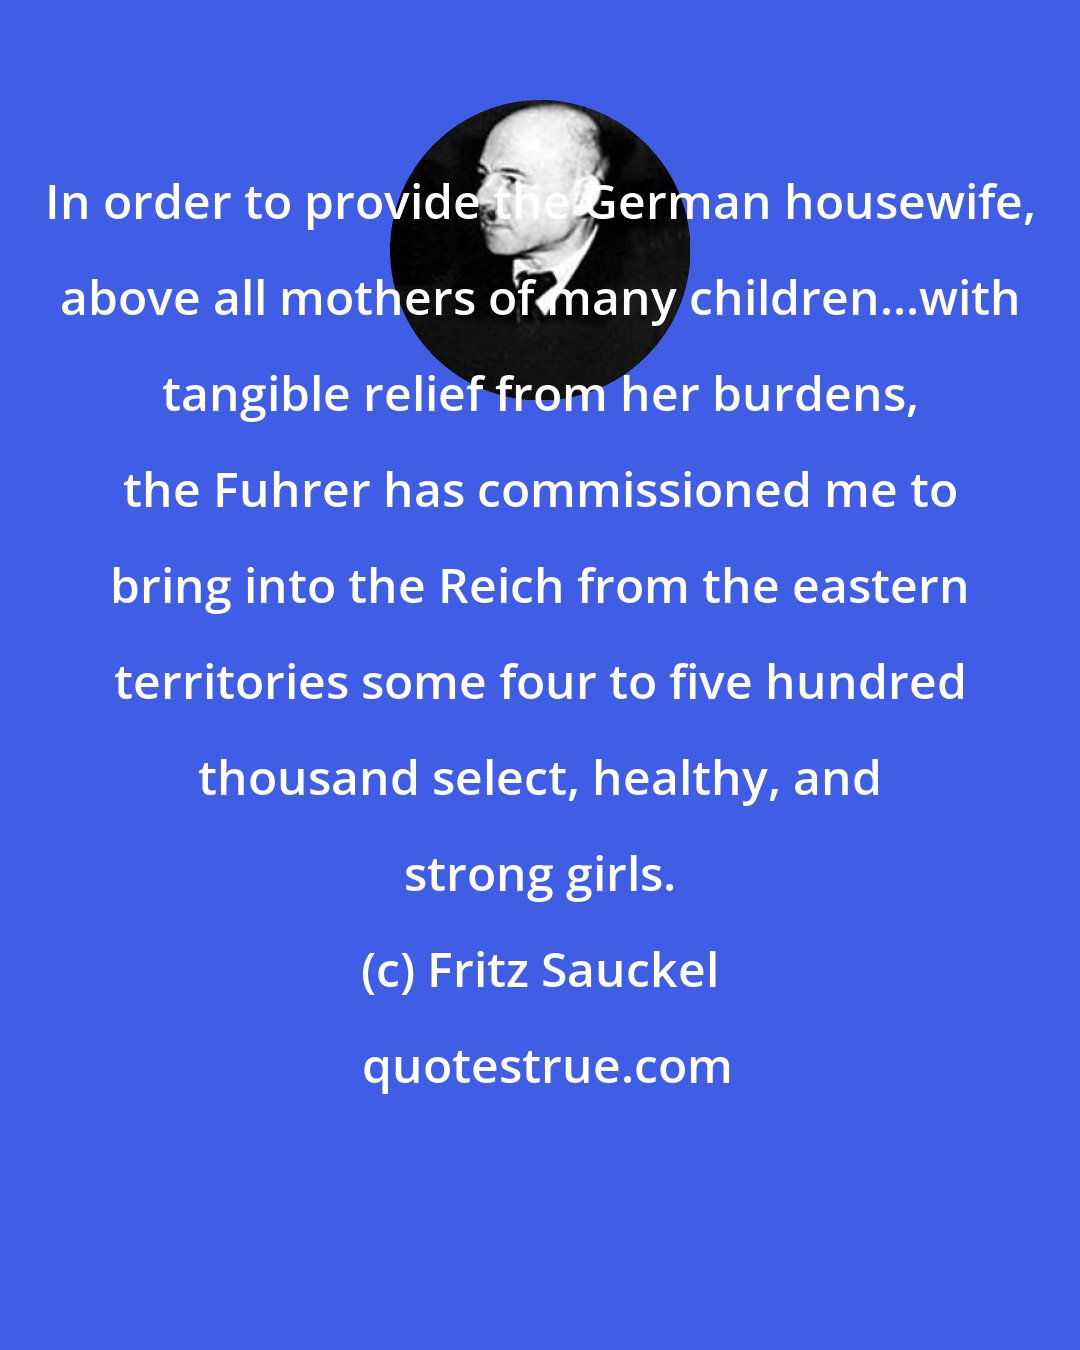 Fritz Sauckel: In order to provide the German housewife, above all mothers of many children...with tangible relief from her burdens, the Fuhrer has commissioned me to bring into the Reich from the eastern territories some four to five hundred thousand select, healthy, and strong girls.